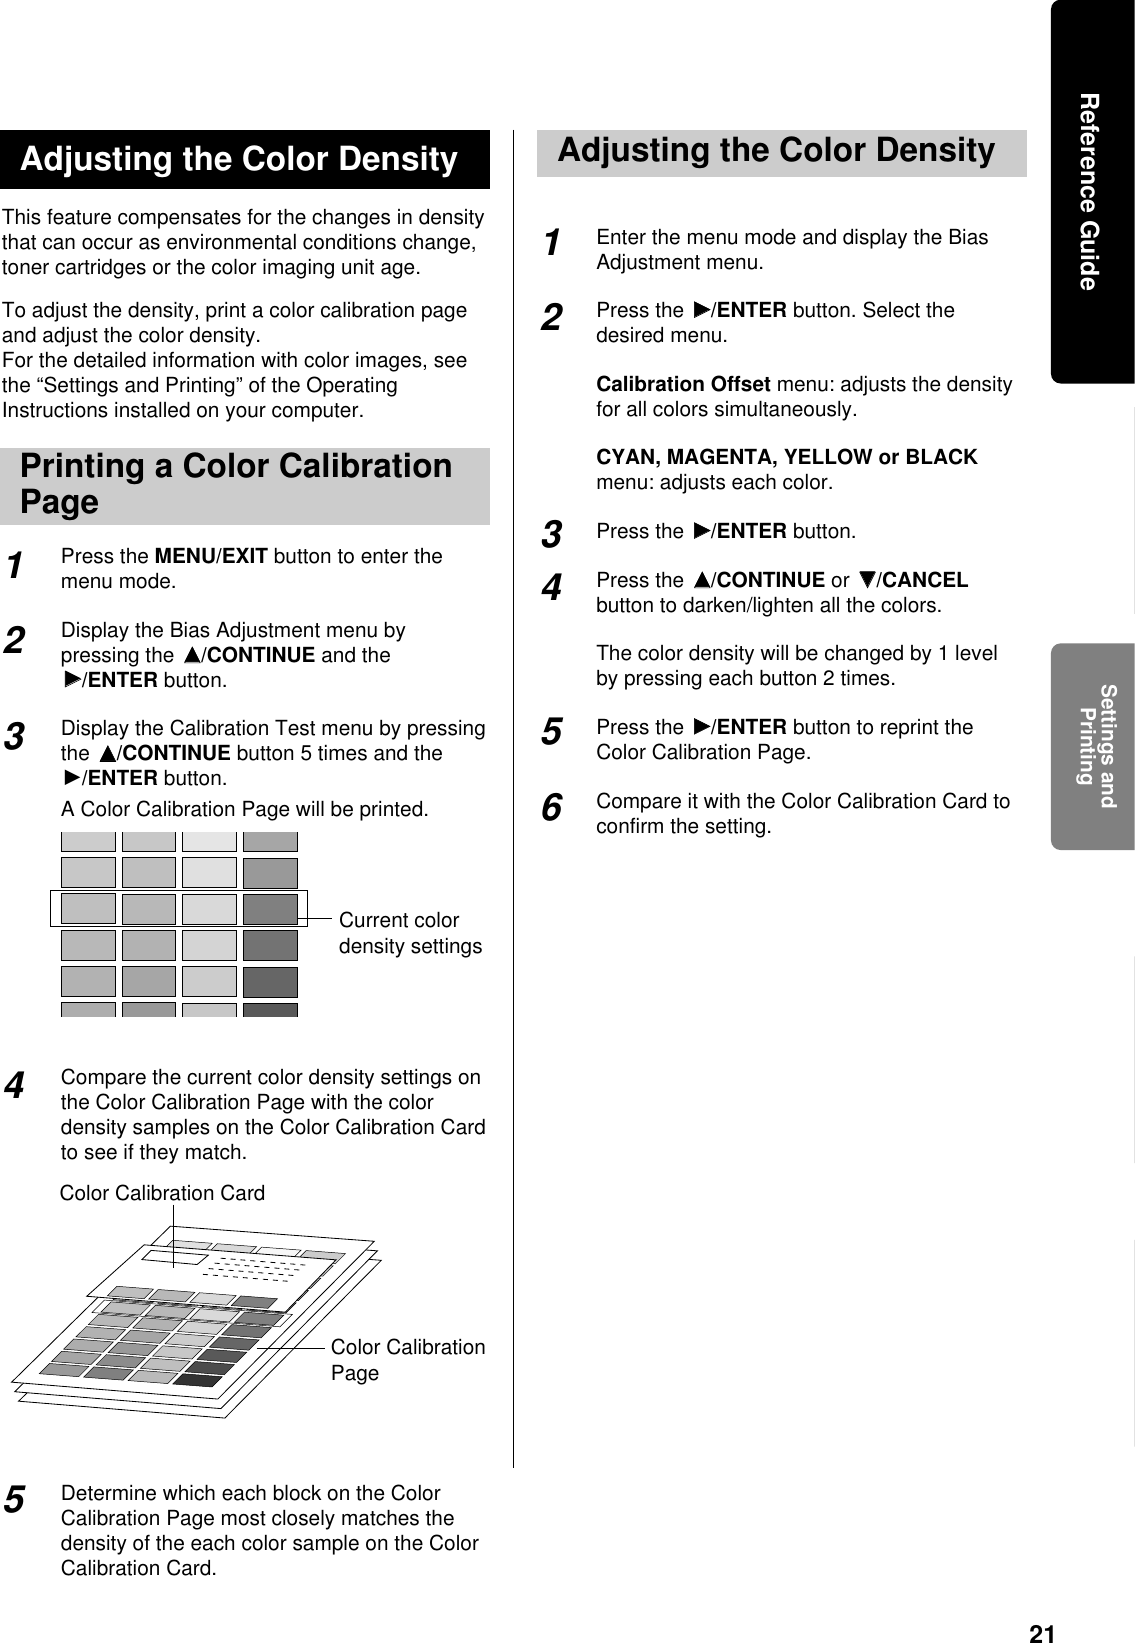 21This feature compensates for the changes in densitythat can occur as environmental conditions change,toner cartridges or the color imaging unit age.To adjust the density, print a color calibration pageand adjust the color density.For the detailed information with color images, seethe “Settings and Printing” of the OperatingInstructions installed on your computer.Press the MENU/EXIT button to enter themenu mode.Display the Bias Adjustment menu bypressing the FF/CONTINUE and theHH/ENTER button.Display the Calibration Test menu by pressingthe FF/CONTINUE button 5 times and theH/ENTER button.A Color Calibration Page will be printed.Compare the current color density settings onthe Color Calibration Page with the colordensity samples on the Color Calibration Cardto see if they match. Determine which each block on the ColorCalibration Page most closely matches thedensity of the each color sample on the ColorCalibration Card. Enter the menu mode and display the BiasAdjustment menu.Press the HH/ENTER button. Select thedesired menu.Calibration Offset menu: adjusts the densityfor all colors simultaneously.CYAN, MAGENTA, YELLOW or BLACKmenu: adjusts each color.Press the HH/ENTER button.Press the FF/CONTINUE or GG/CANCELbutton to darken/lighten all the colors.The color density will be changed by 1 levelby pressing each button 2 times.Press the HH/ENTER button to reprint theColor Calibration Page.Compare it with the Color Calibration Card toconfirm the setting.Adjusting the Color Density2341Current colordensity settings5Color Calibration CardColor CalibrationPageAdjusting the Color Density234156Printing a Color CalibrationPageSettings andPrintingReference Guide